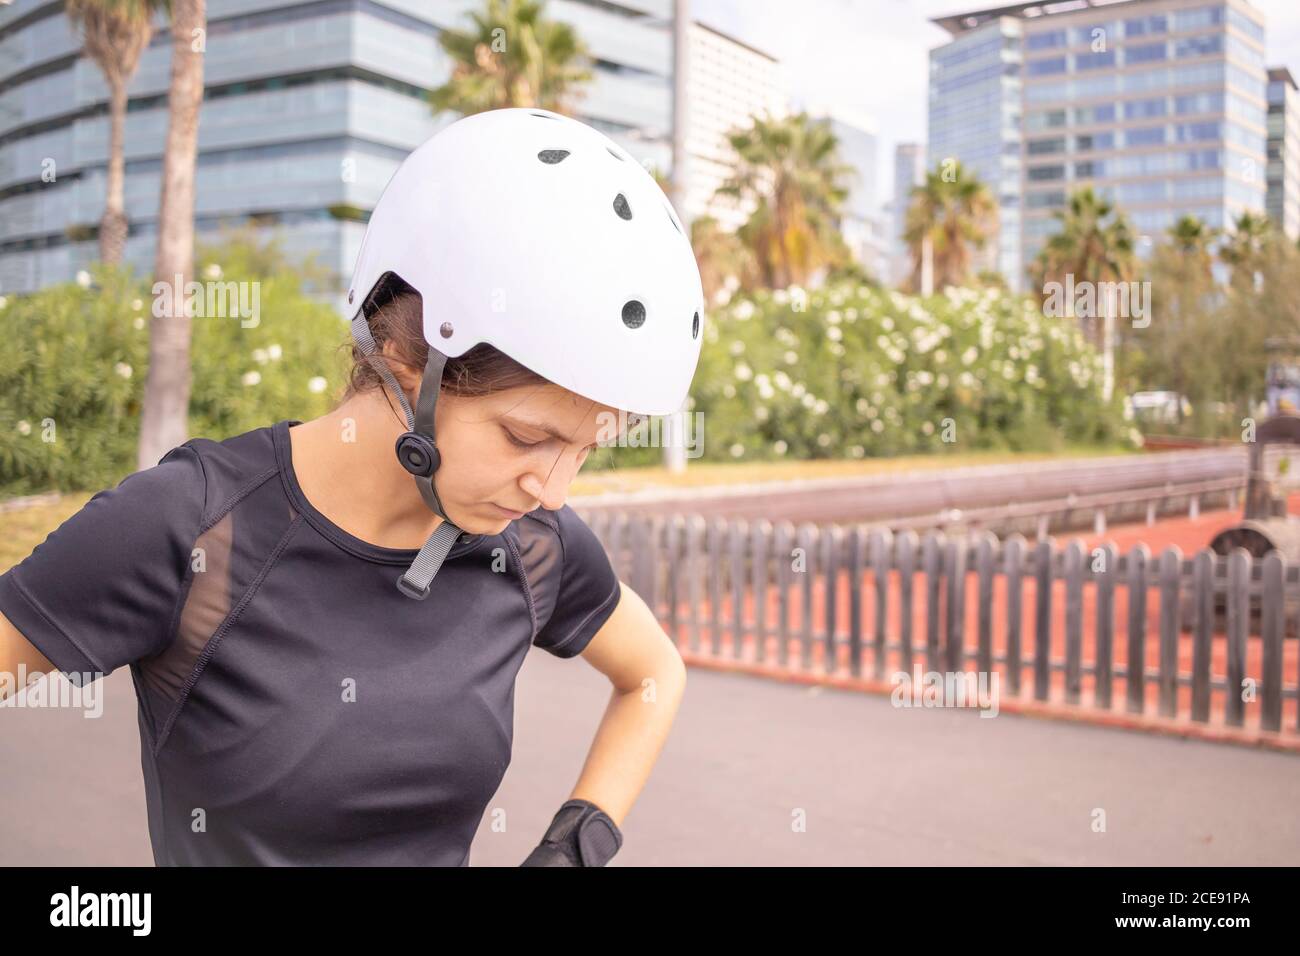 Very sad after failure young roller skater caucasian woman in the white helmet and black sporty clothes, skatepark, urban environment. Stock Photo